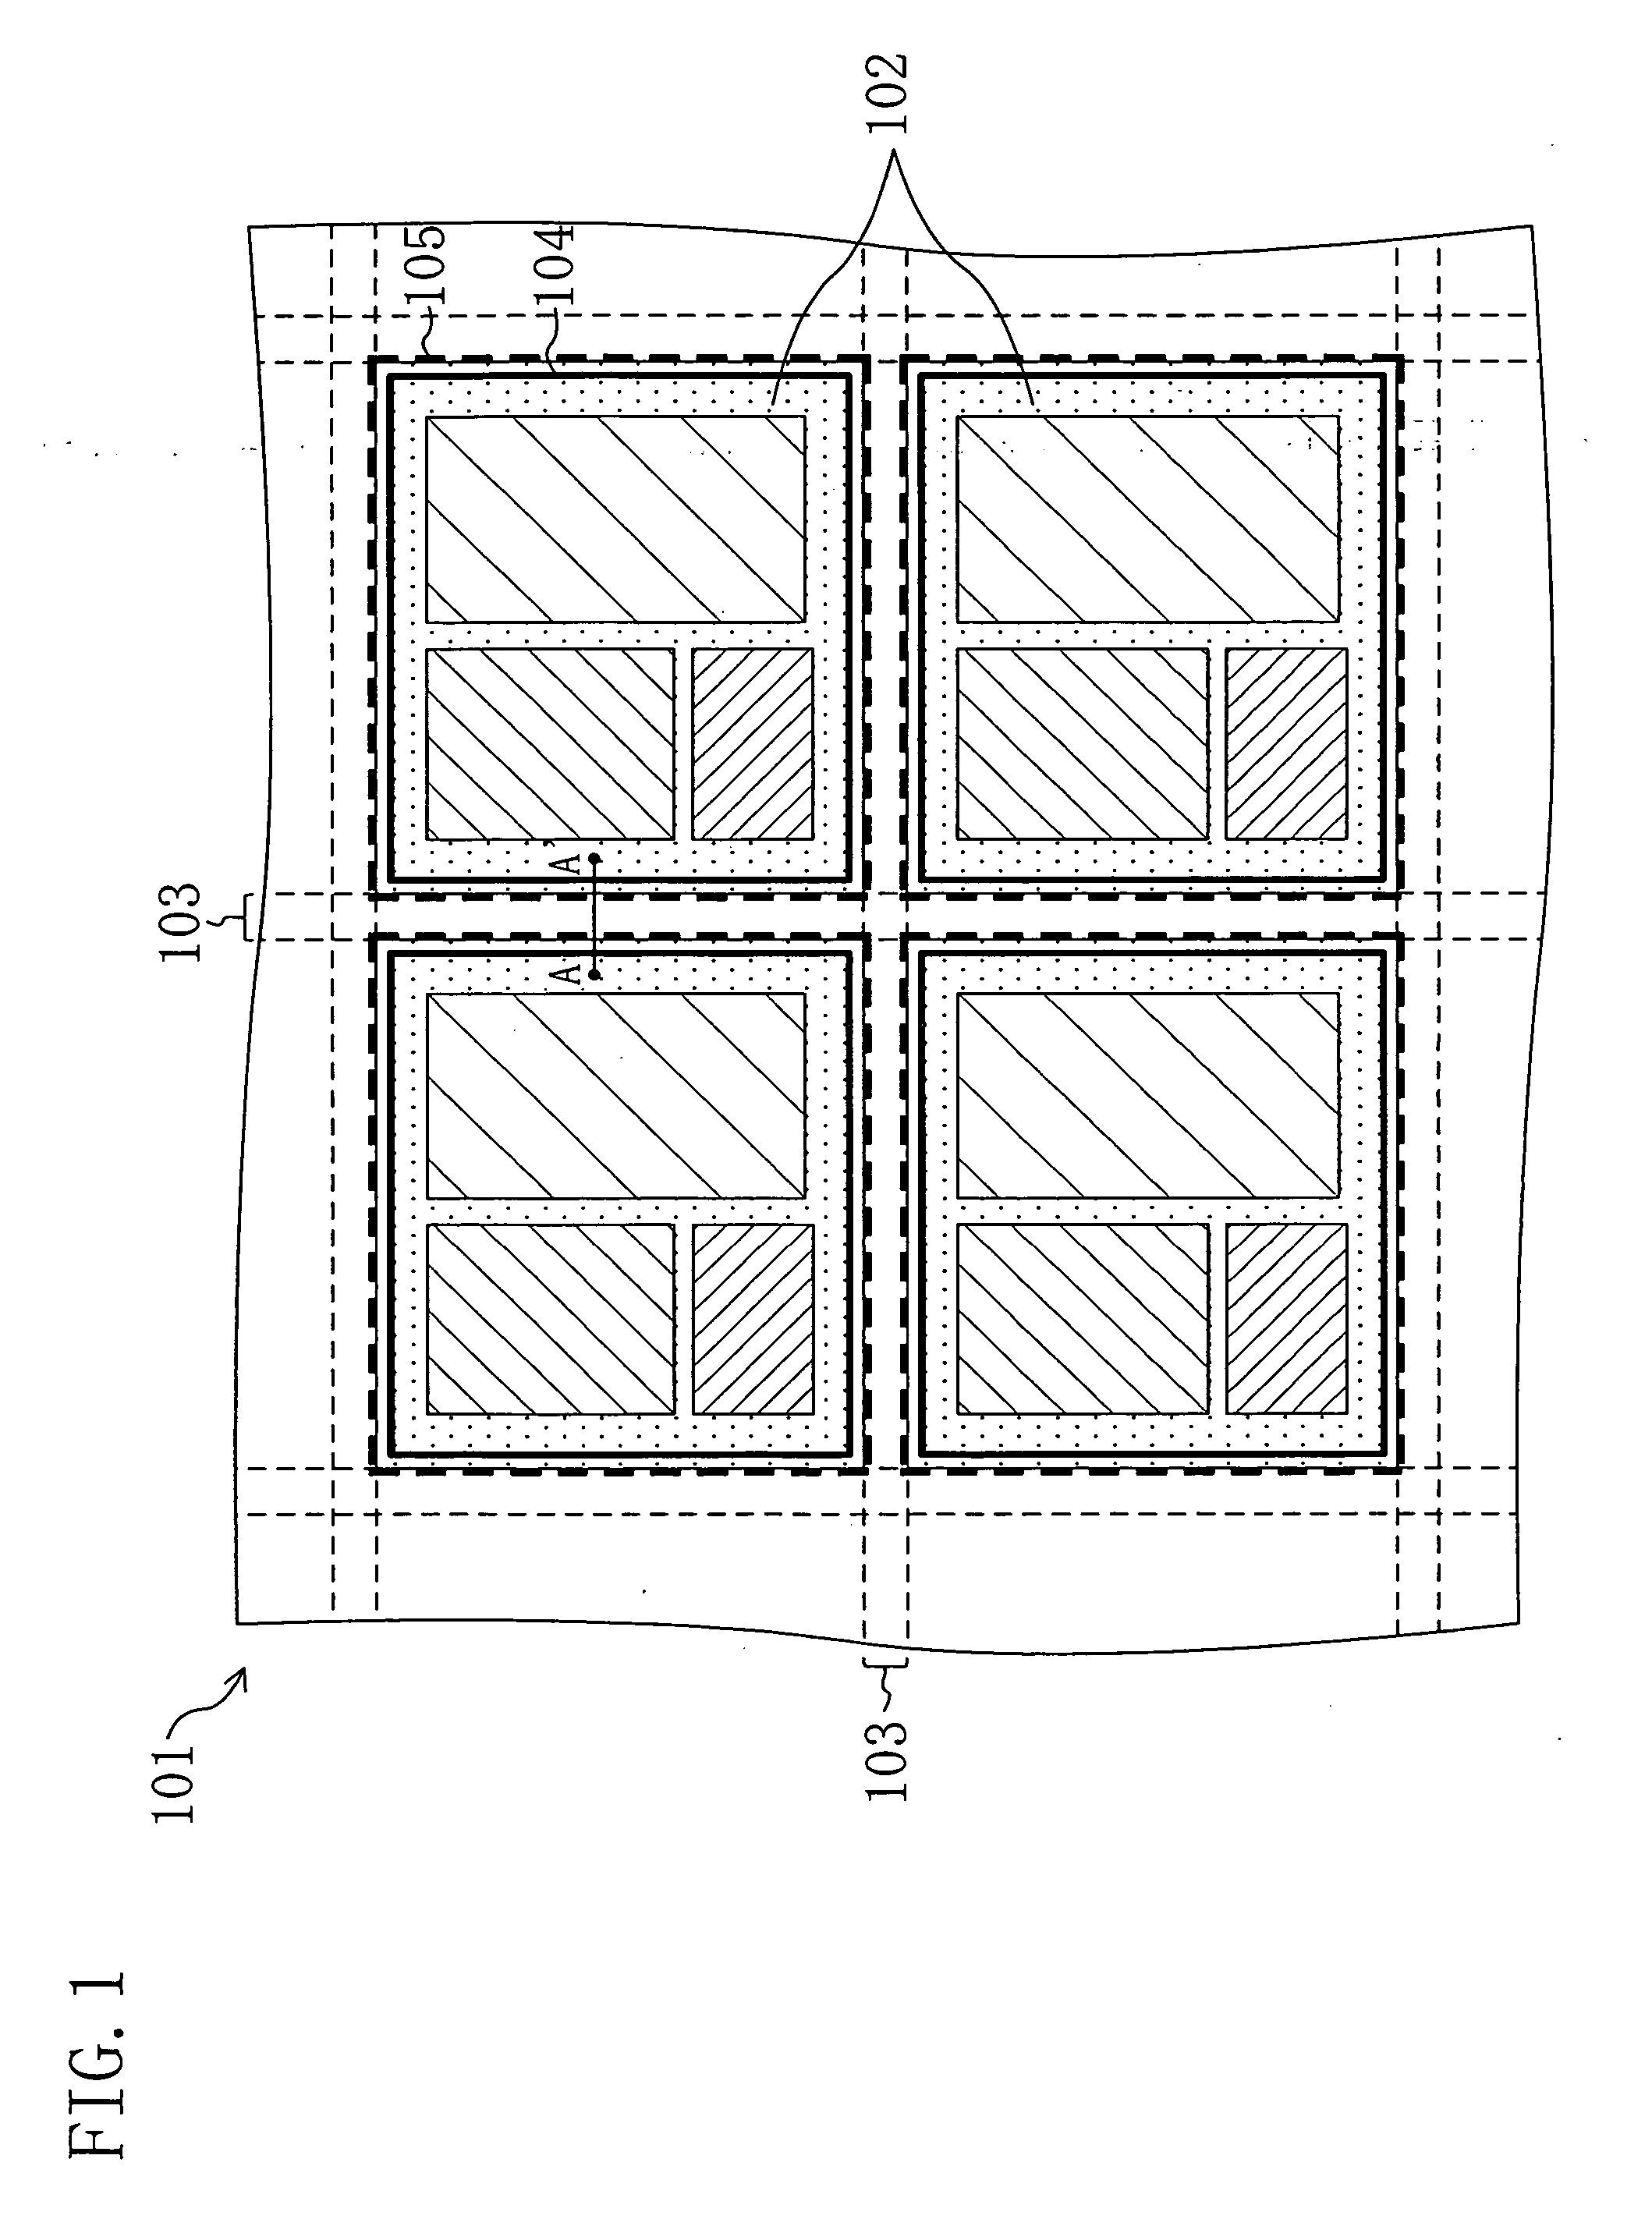 Electronic device and method for fabricating the same